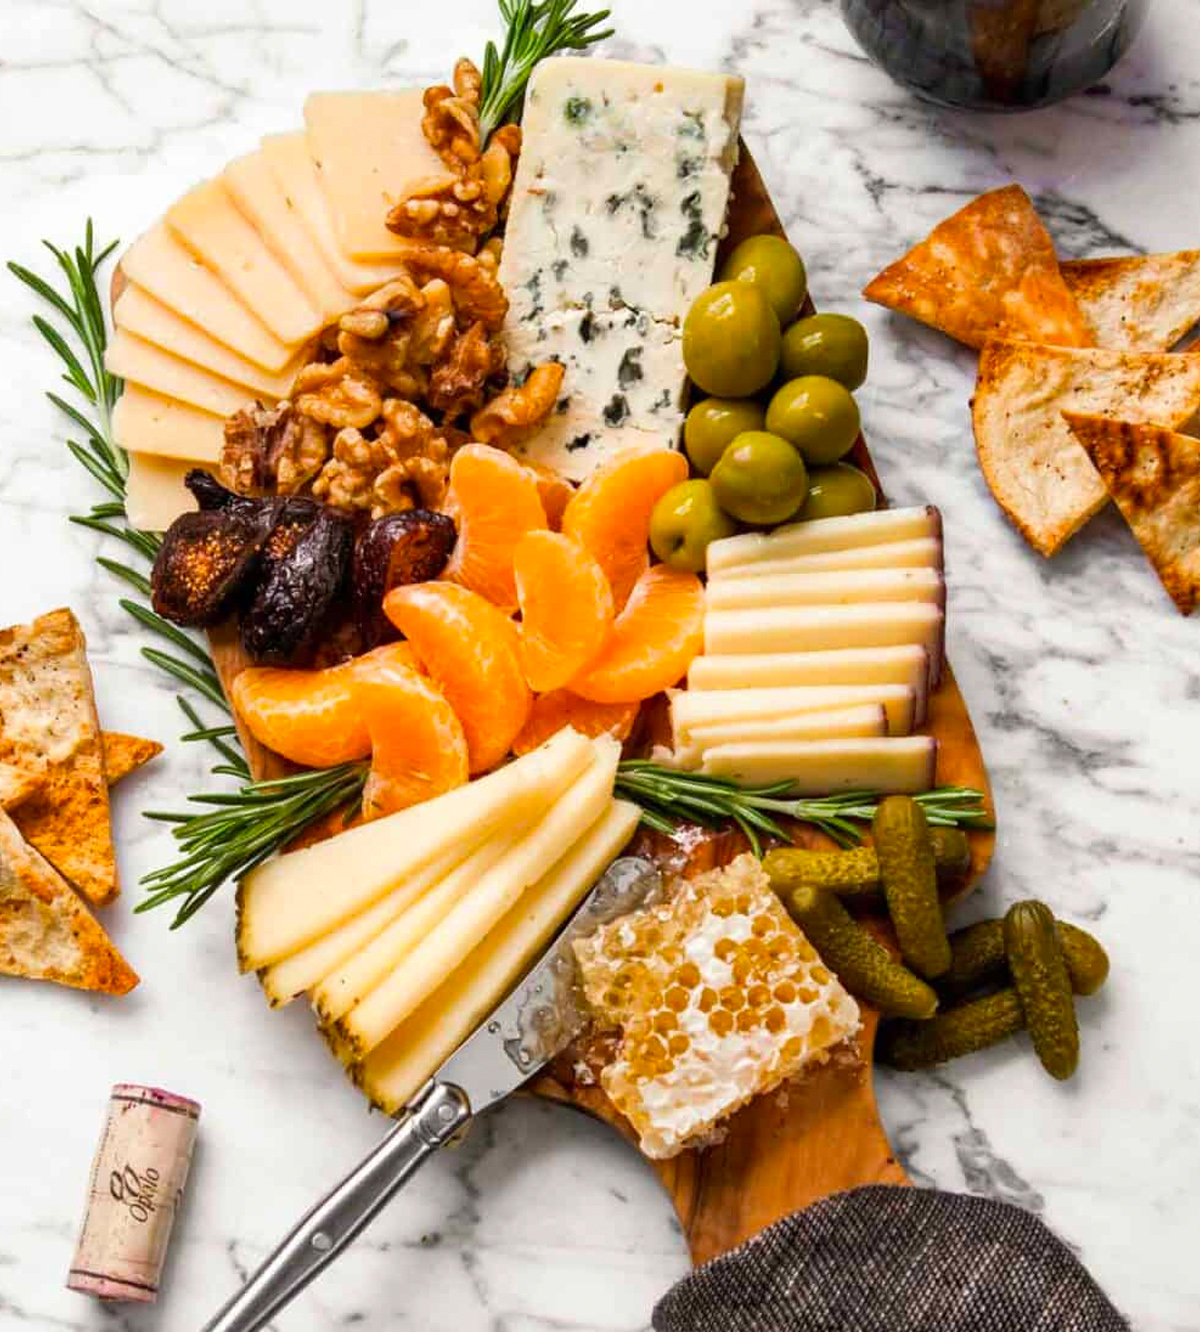 Cheese, olives, clementine's nuts, and crackers complete Zestful Kitchen's winter cheese board.